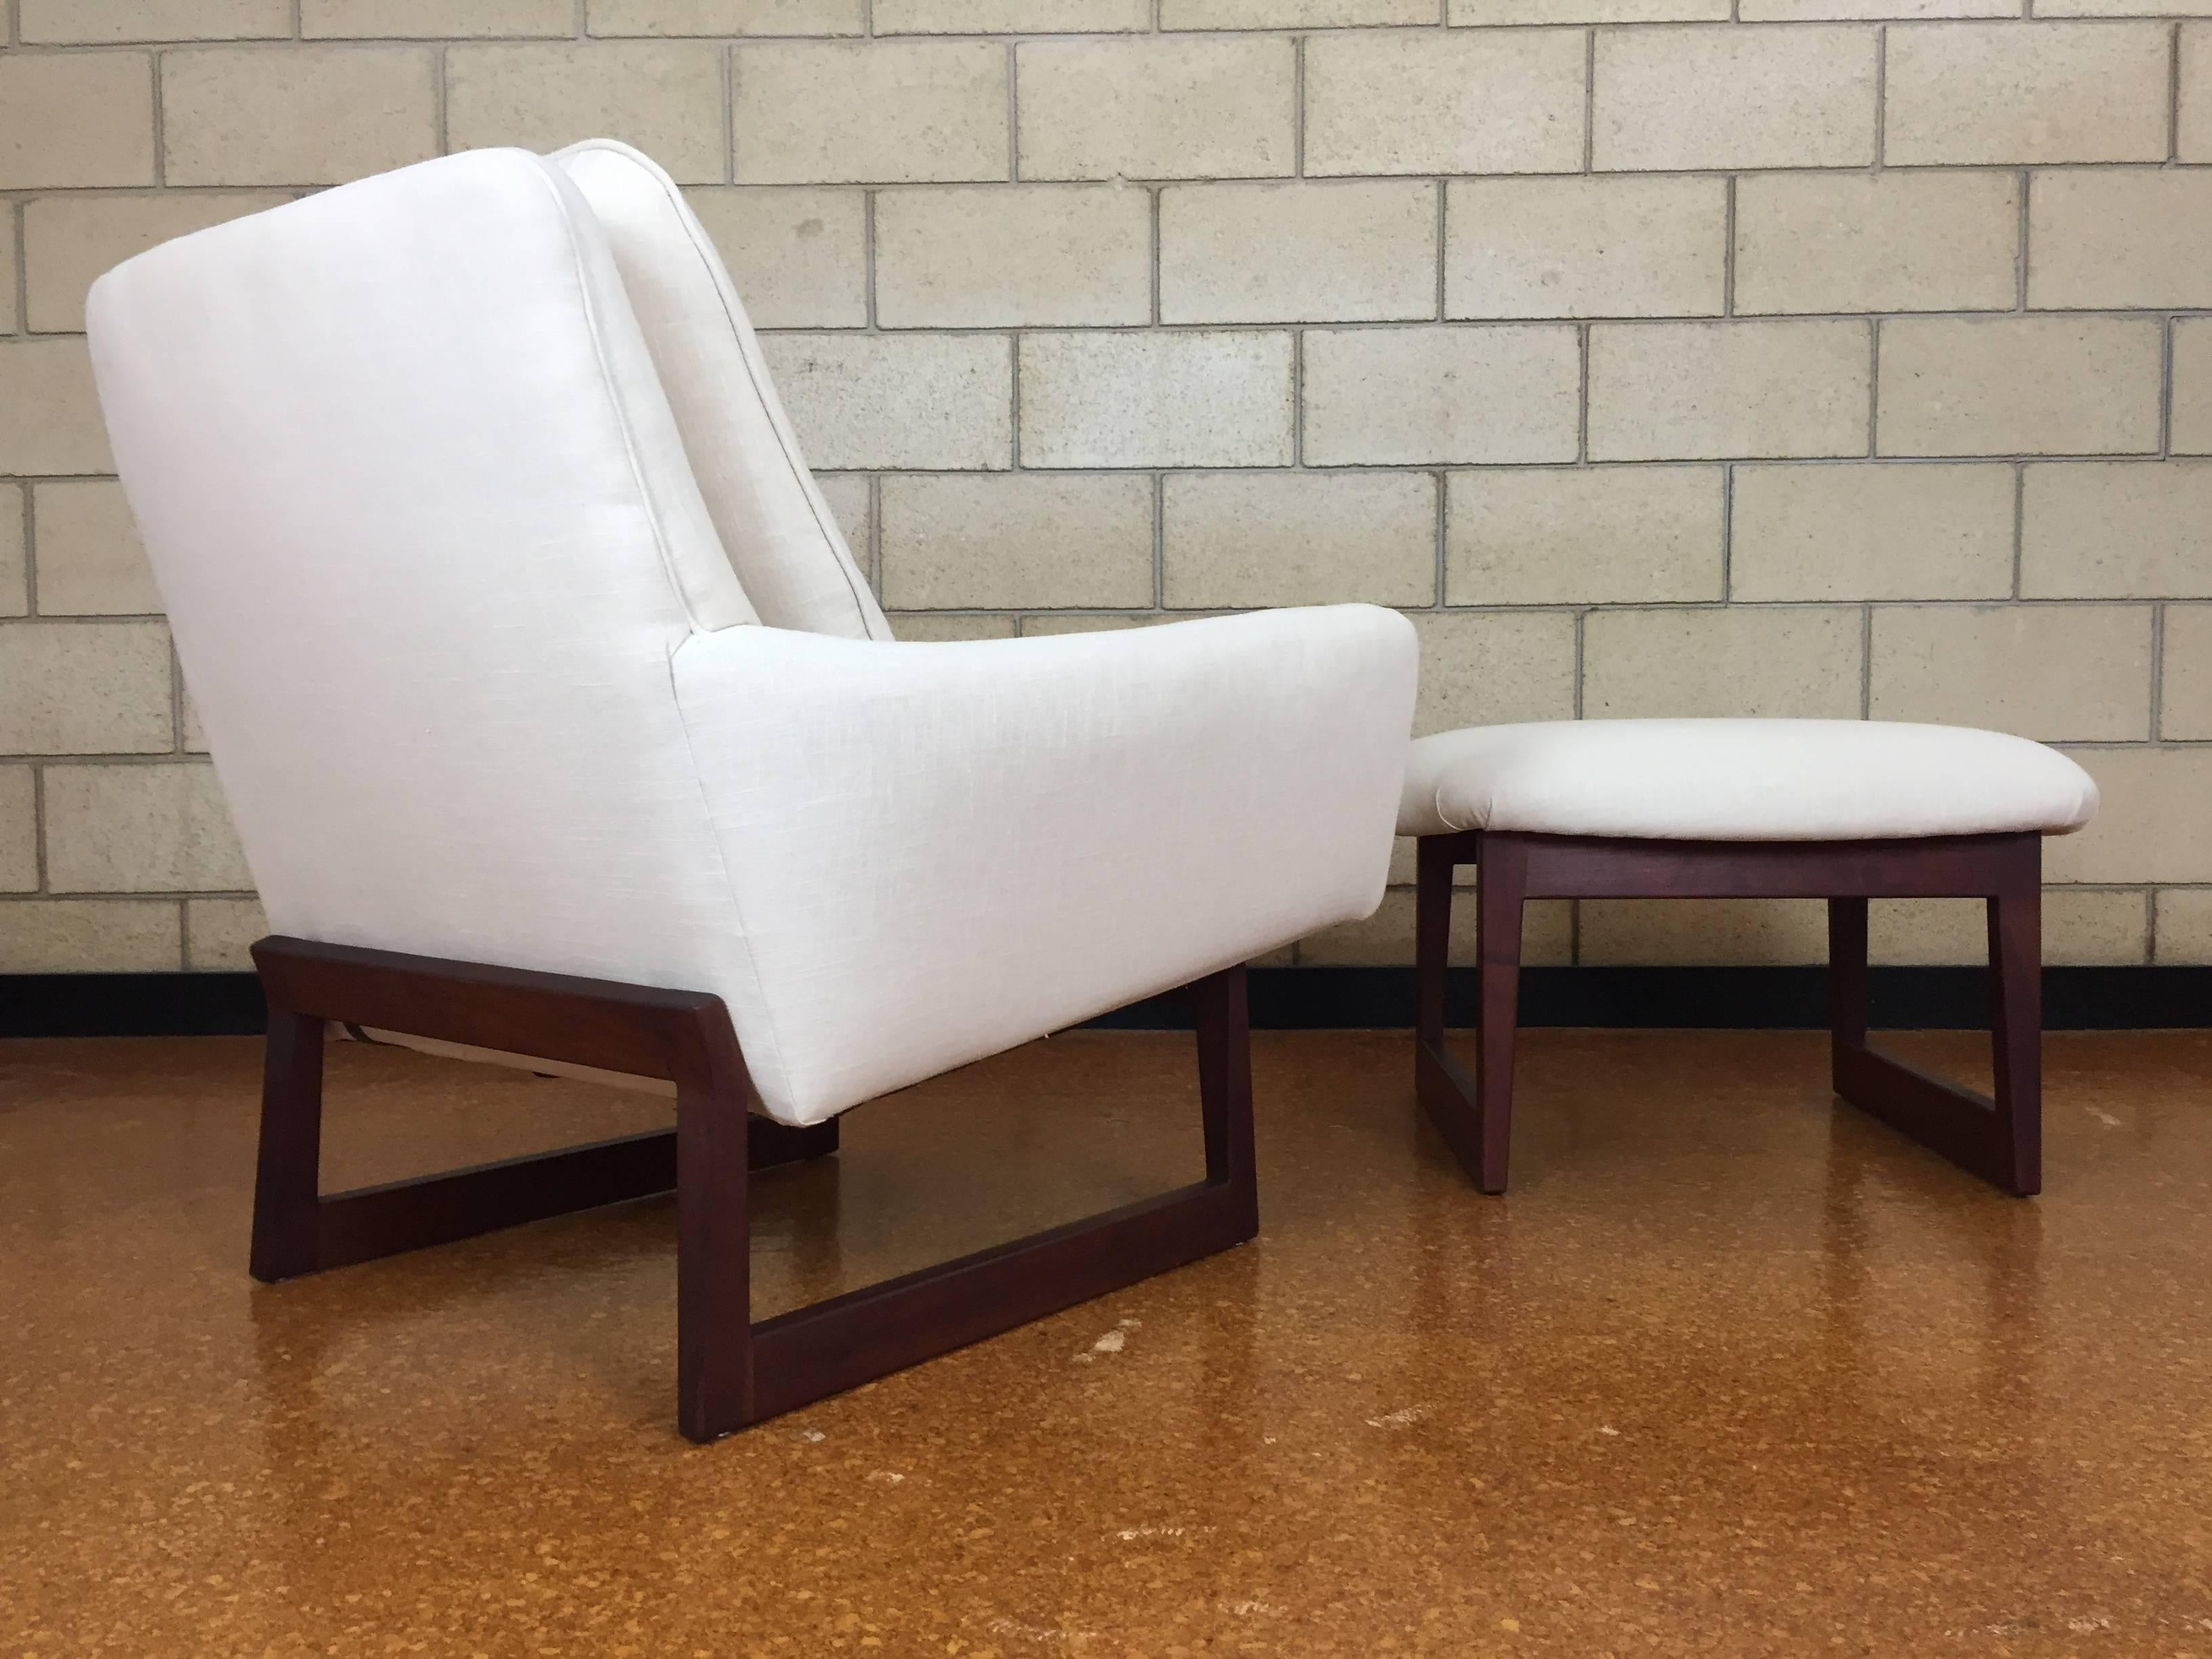 Jens Risom lounge chair and ottoman, reupholstered in cream linen, new cushions and straps. Walnut base.
A beautiful stand out set that will be the focal point of any room. 
Please request for a reduced shipping cost for Northeast delivery.